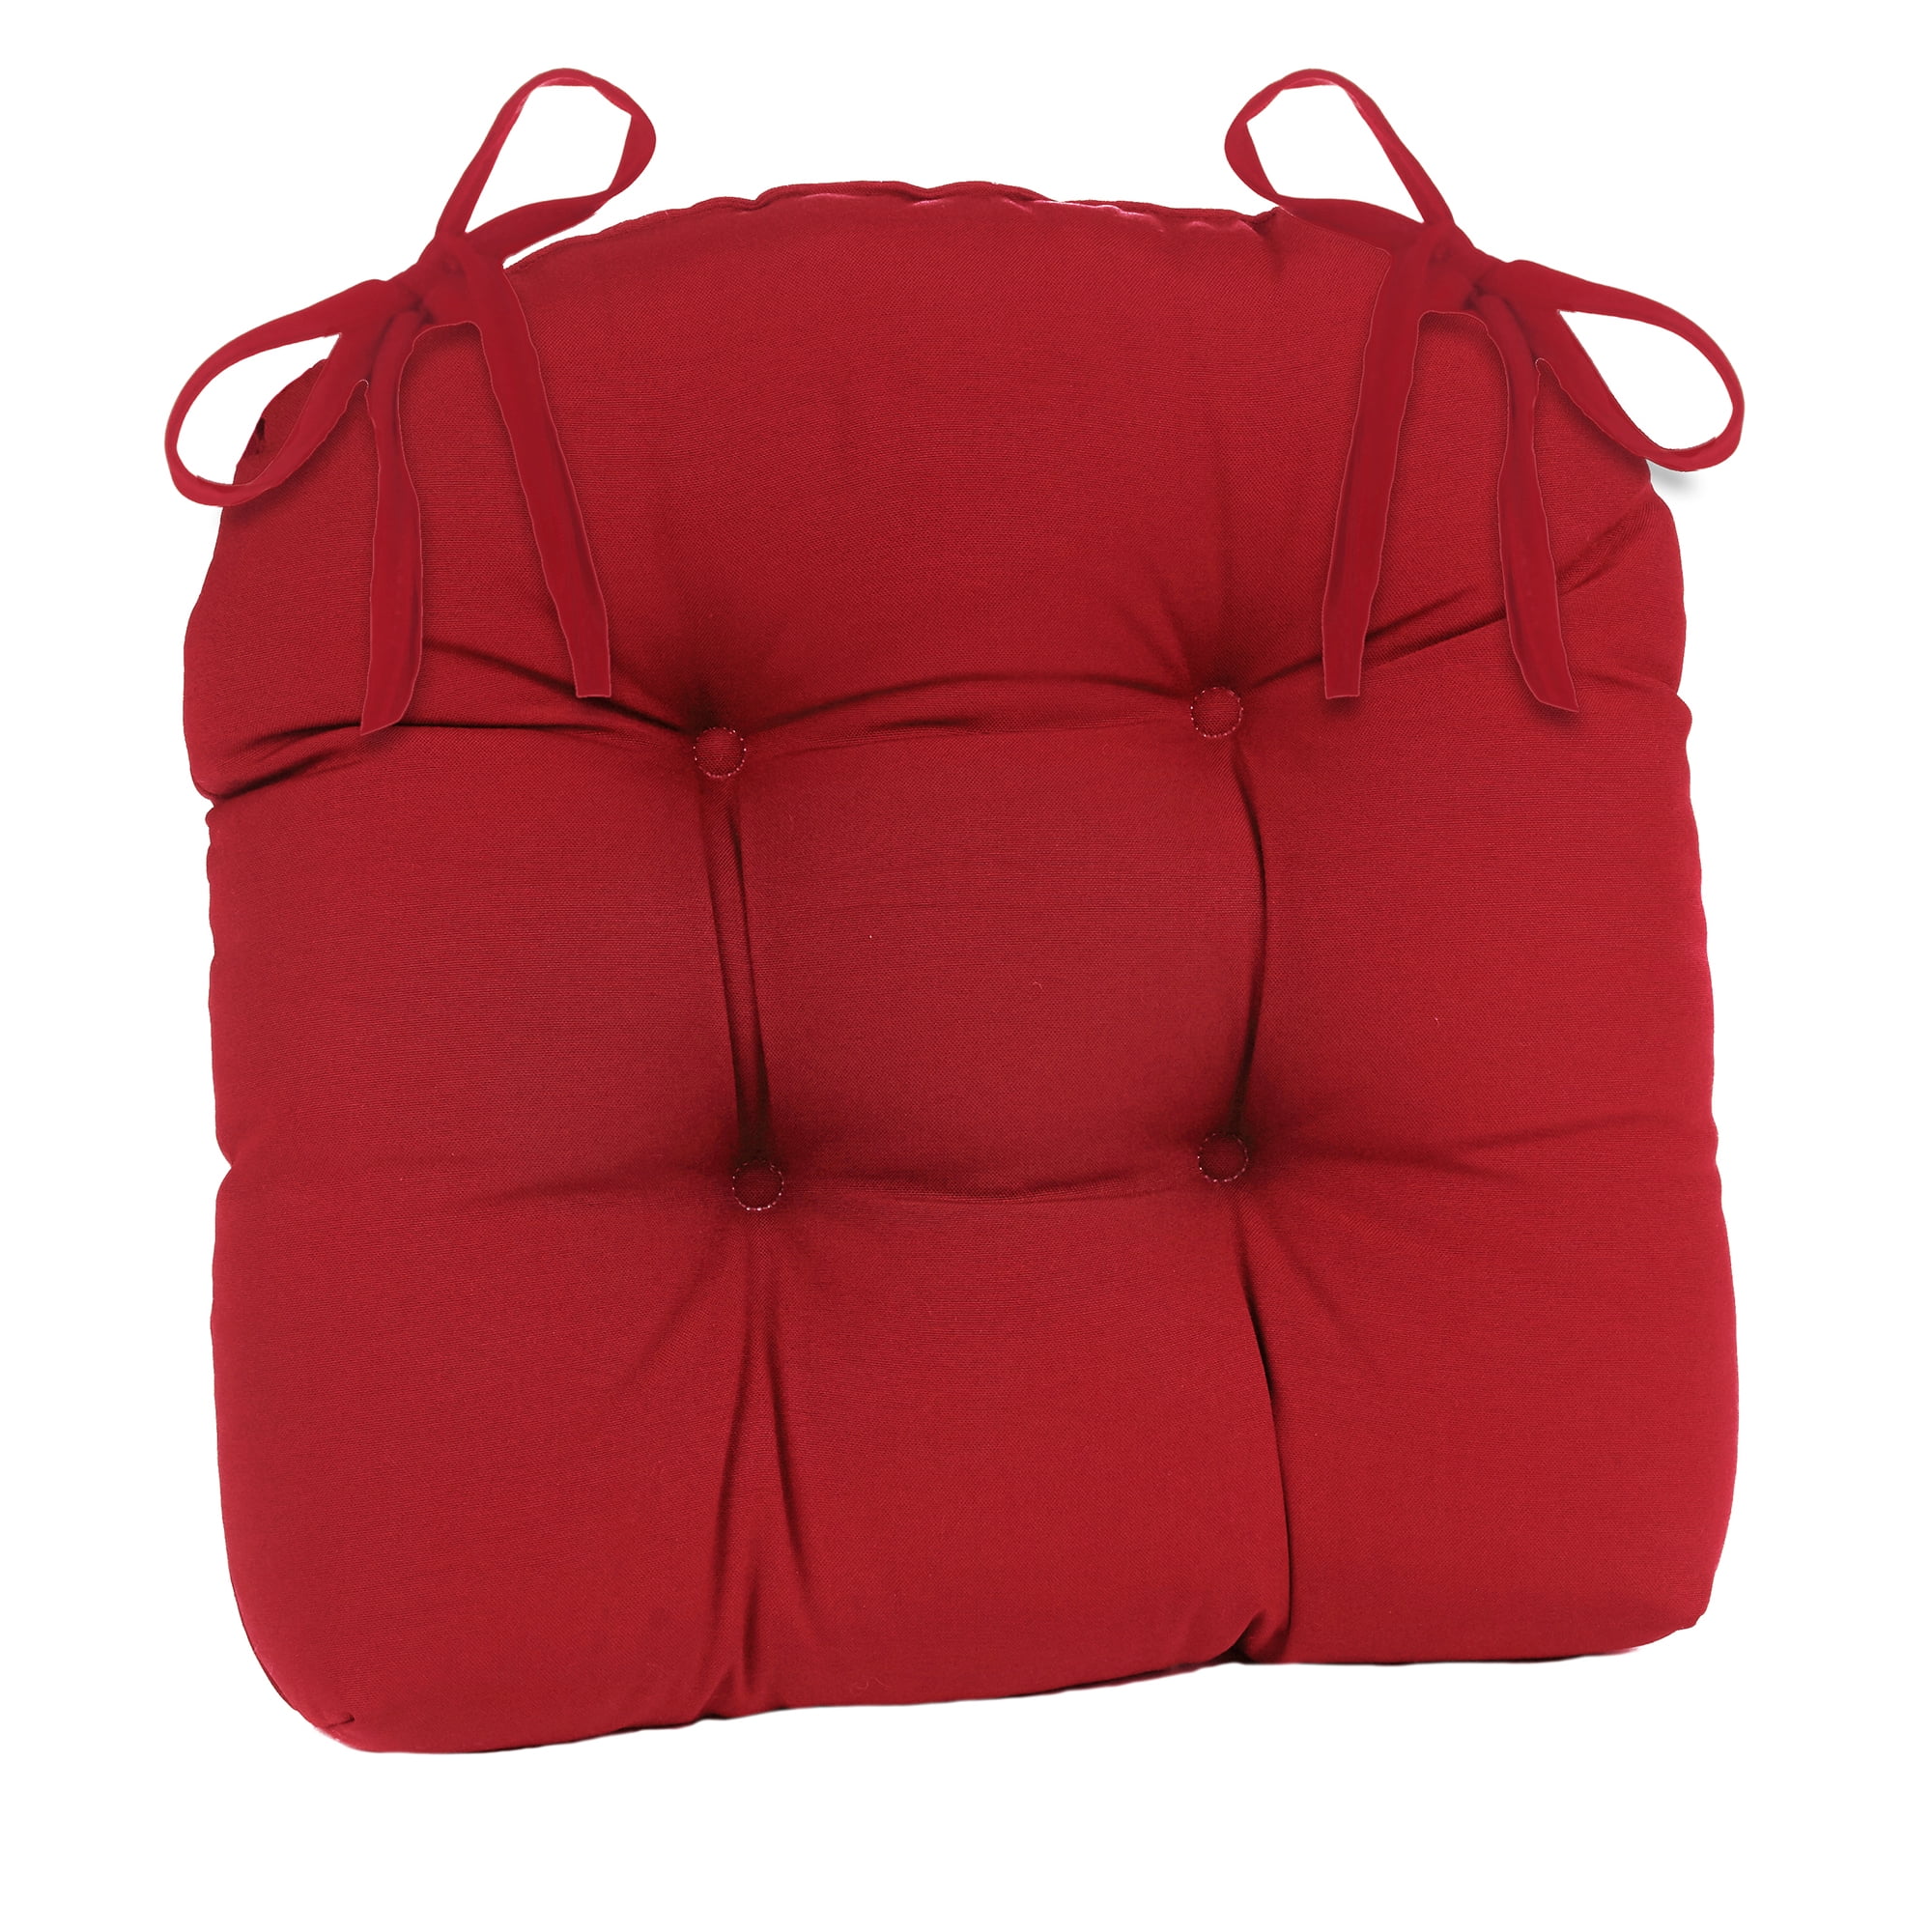 Patio Outdoor/Indoor Red Extra Large Chair Cushion